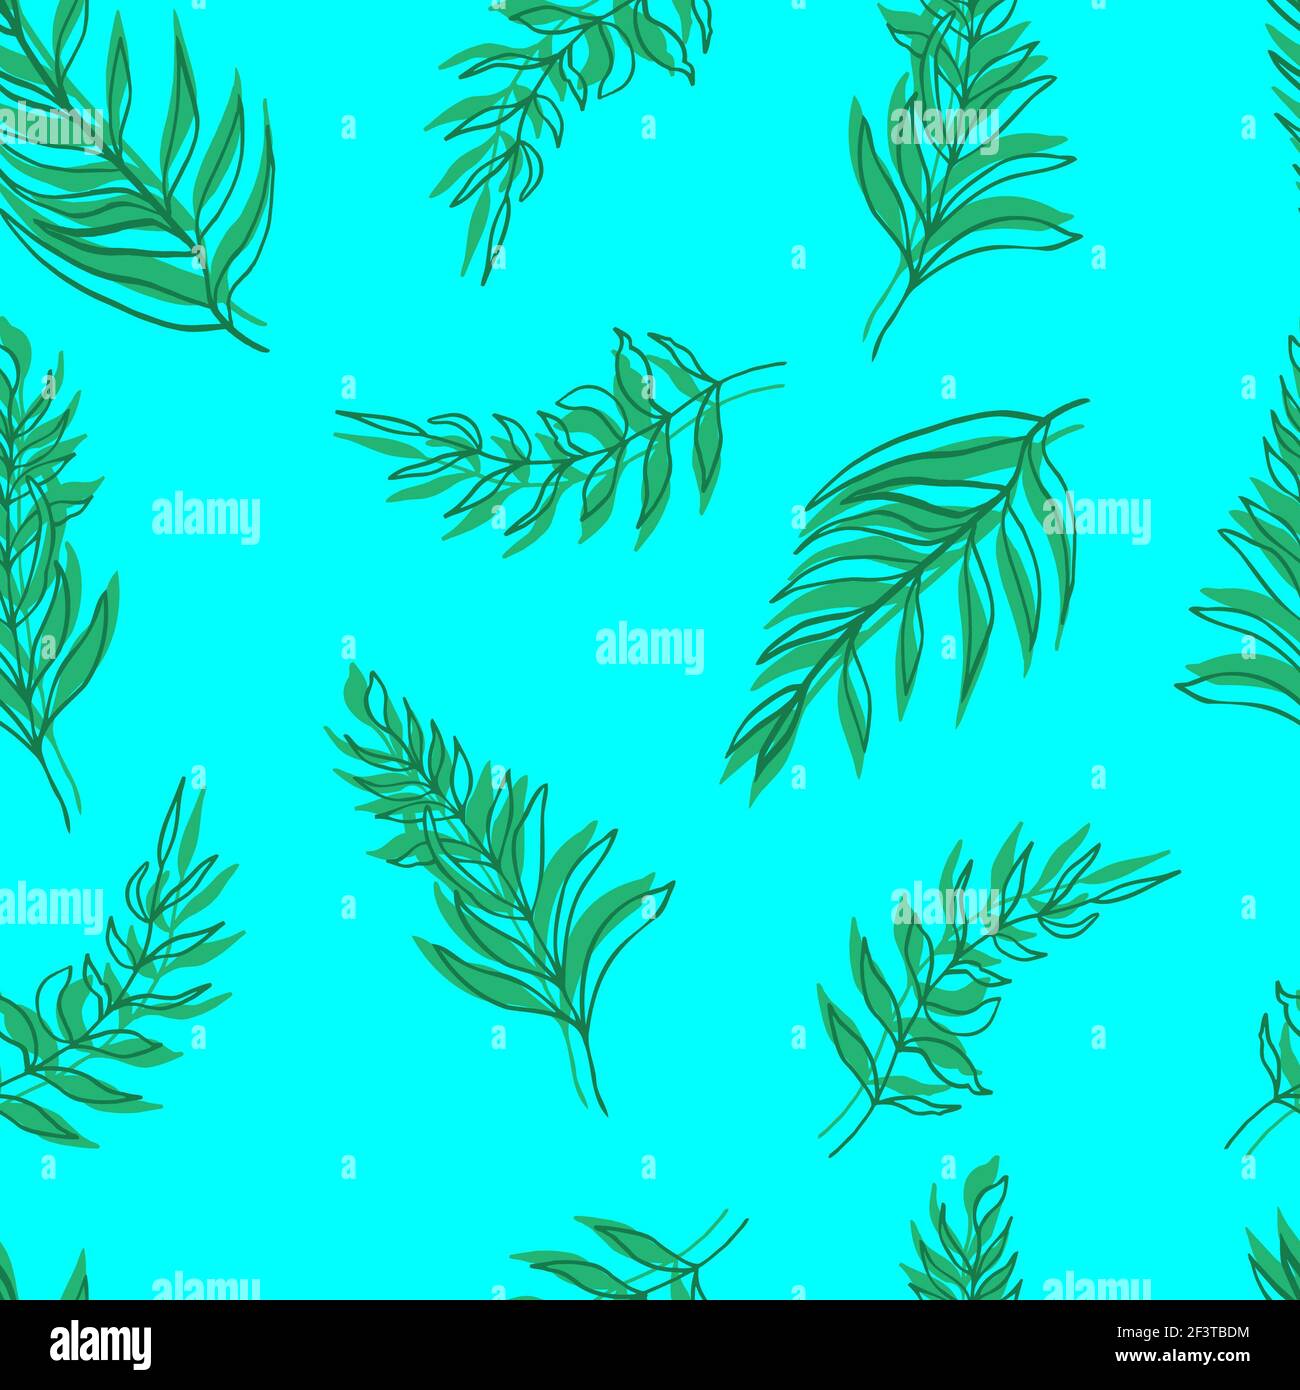 seamless pattern  palm leaves green leaves and contours on background. For textiles, packaging, fabrics, wallpapers, backgrounds, invitations. Stock Photo